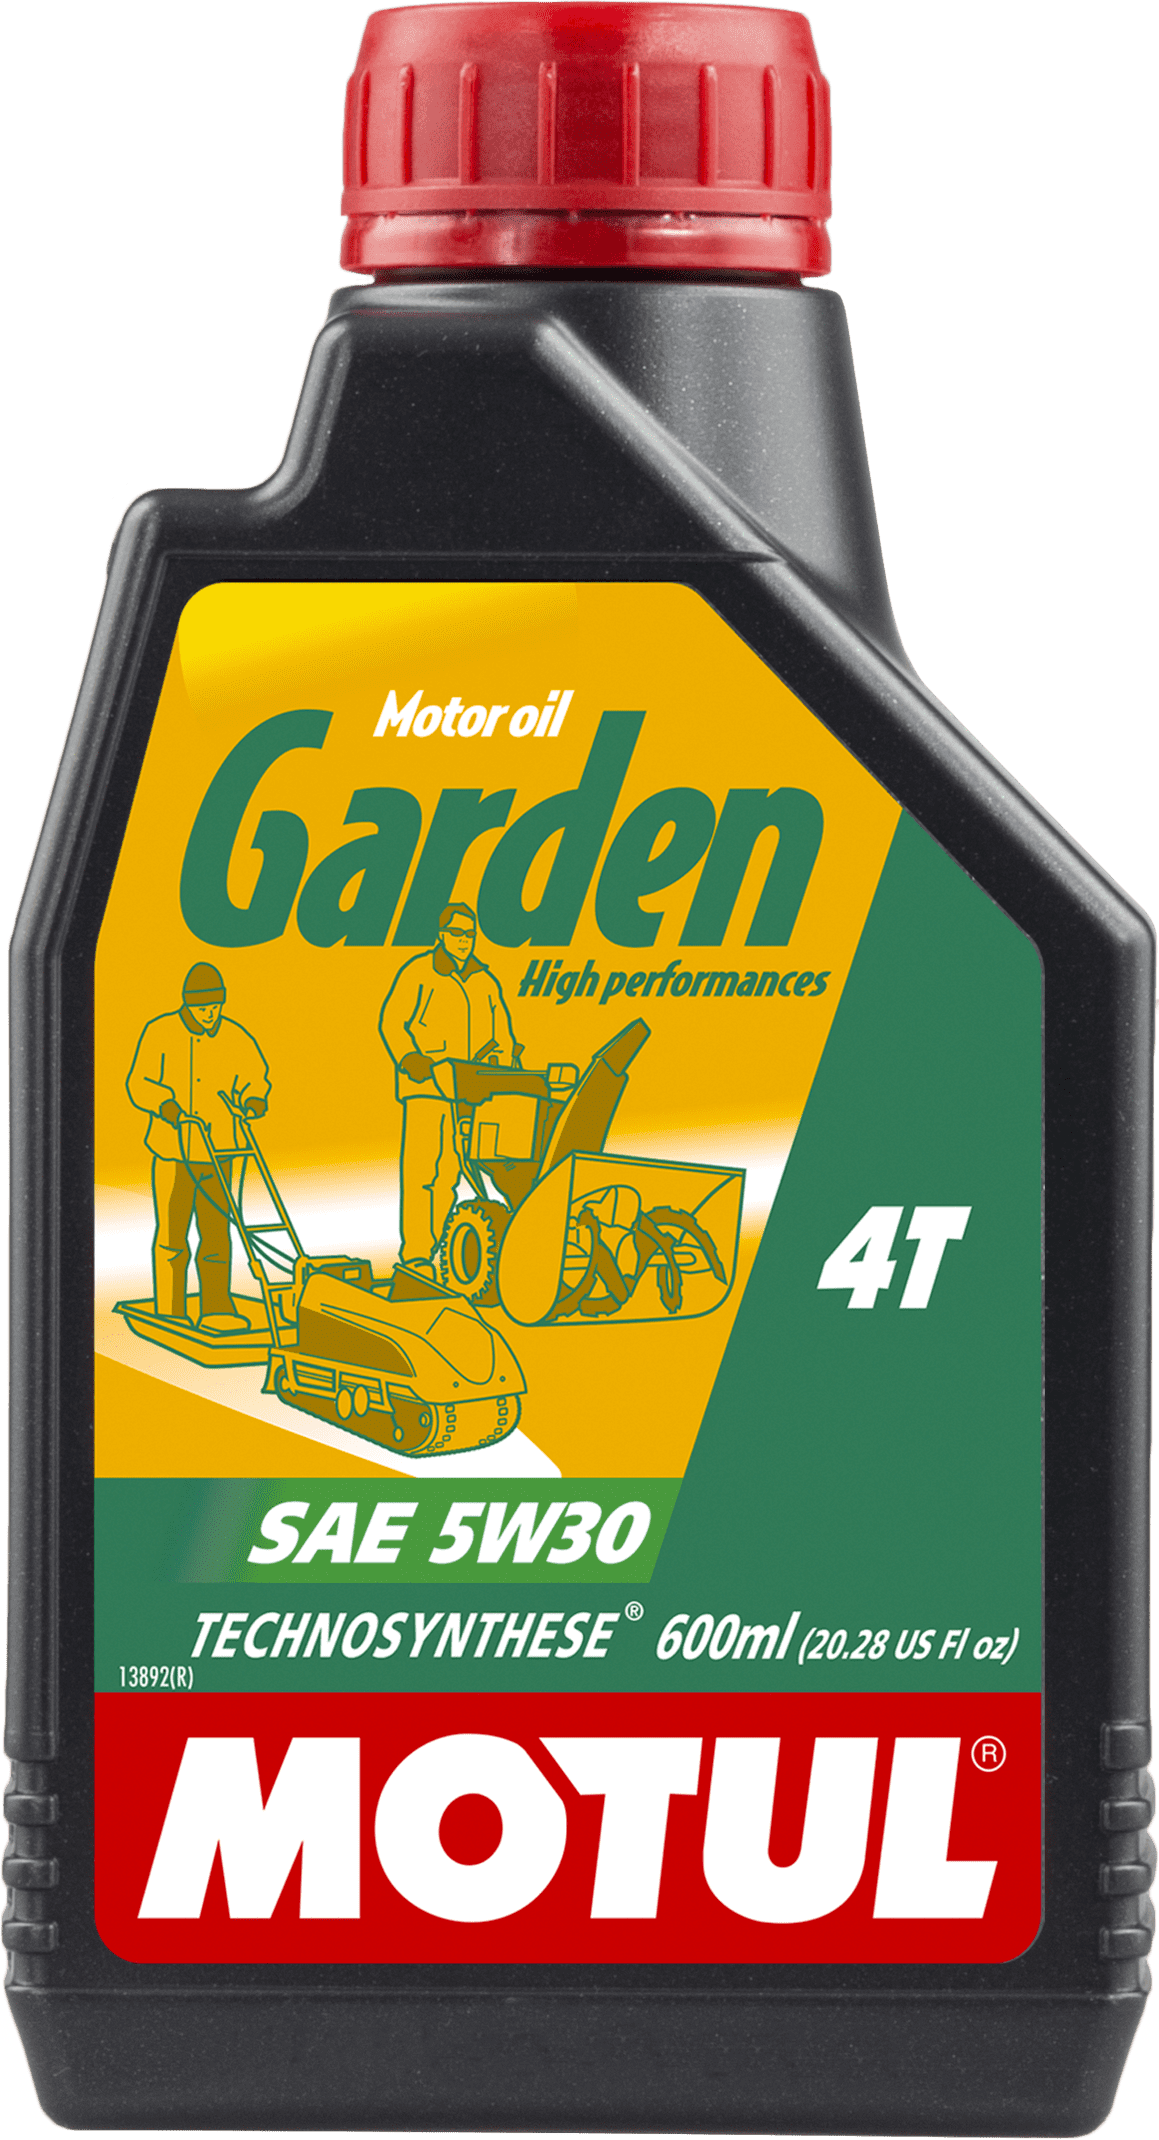 106989-600ML High-performance engine oil based on MOTUL Technosynthese® for garden machinery such as lawnmowers, ride-on mowers, motorhoes or snowploughs.